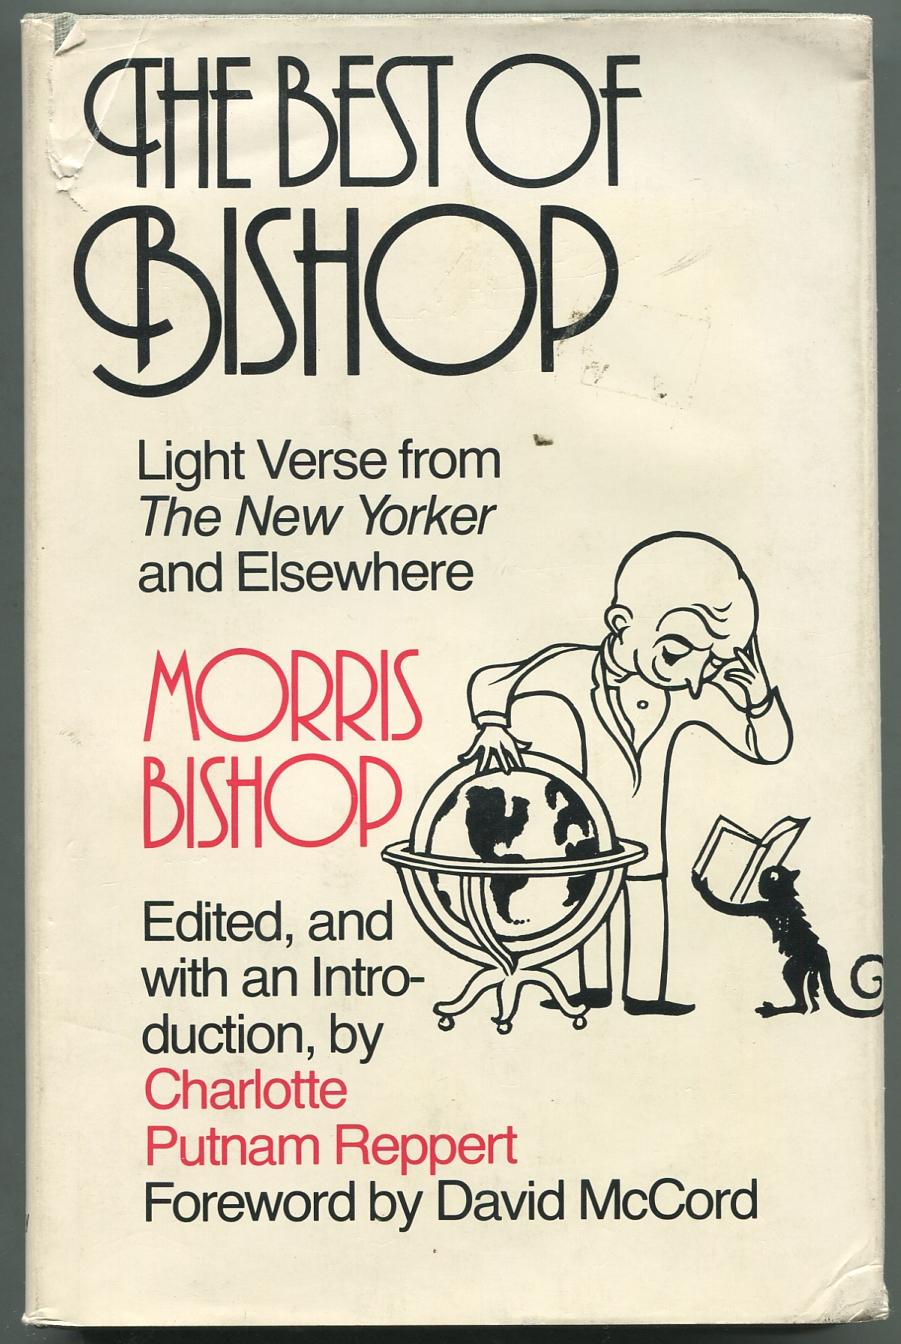 Best of Bishop: Light Verse from "The New Yorker" and Elsewhere